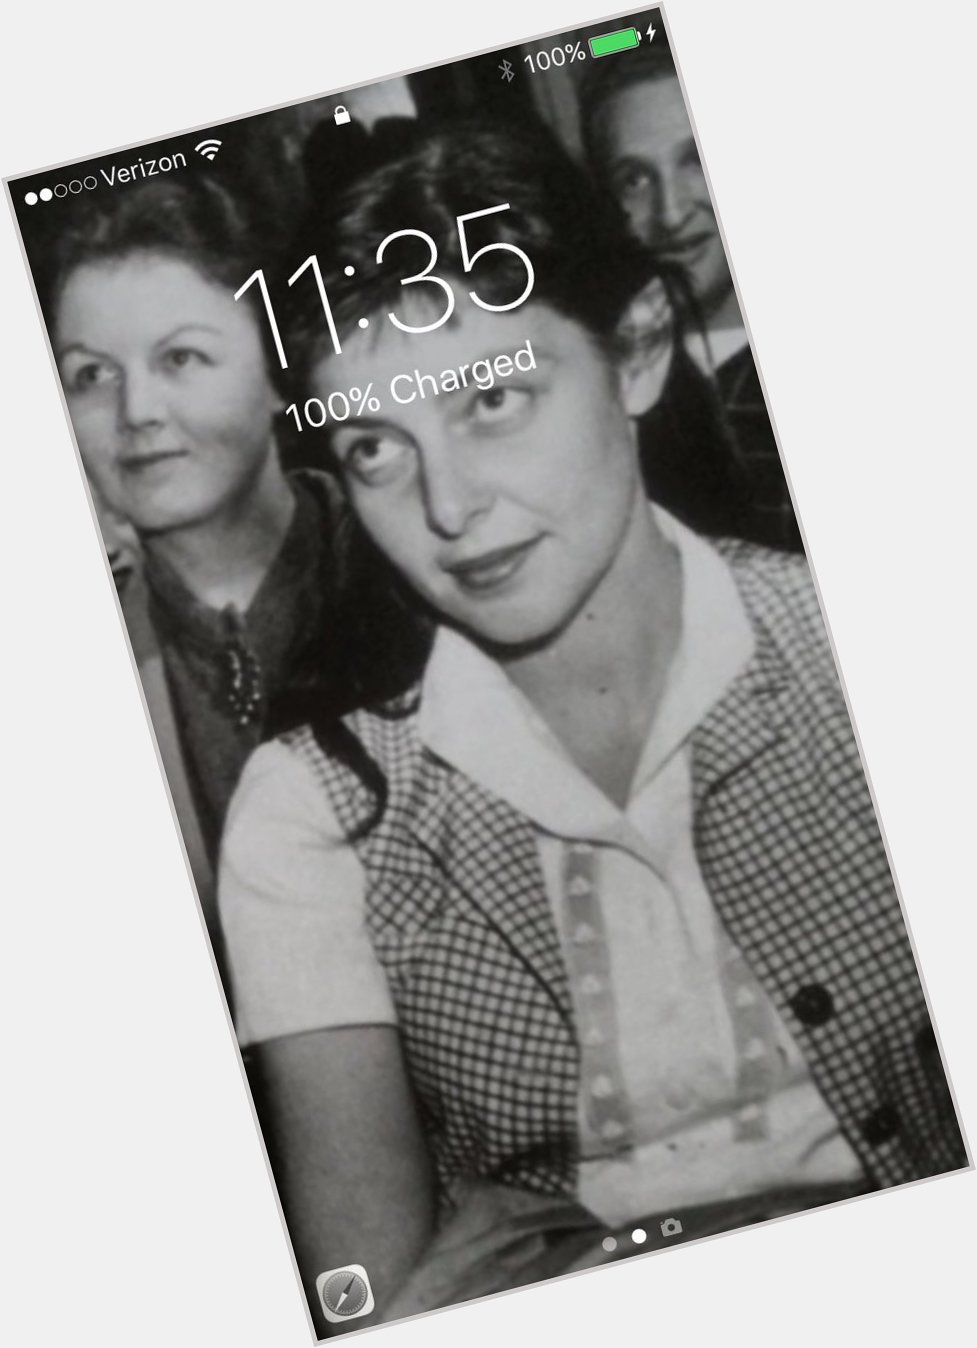 Oops, almost forgot to wish Elaine May a happy birthday, & she\s my lock screen and everything!! 